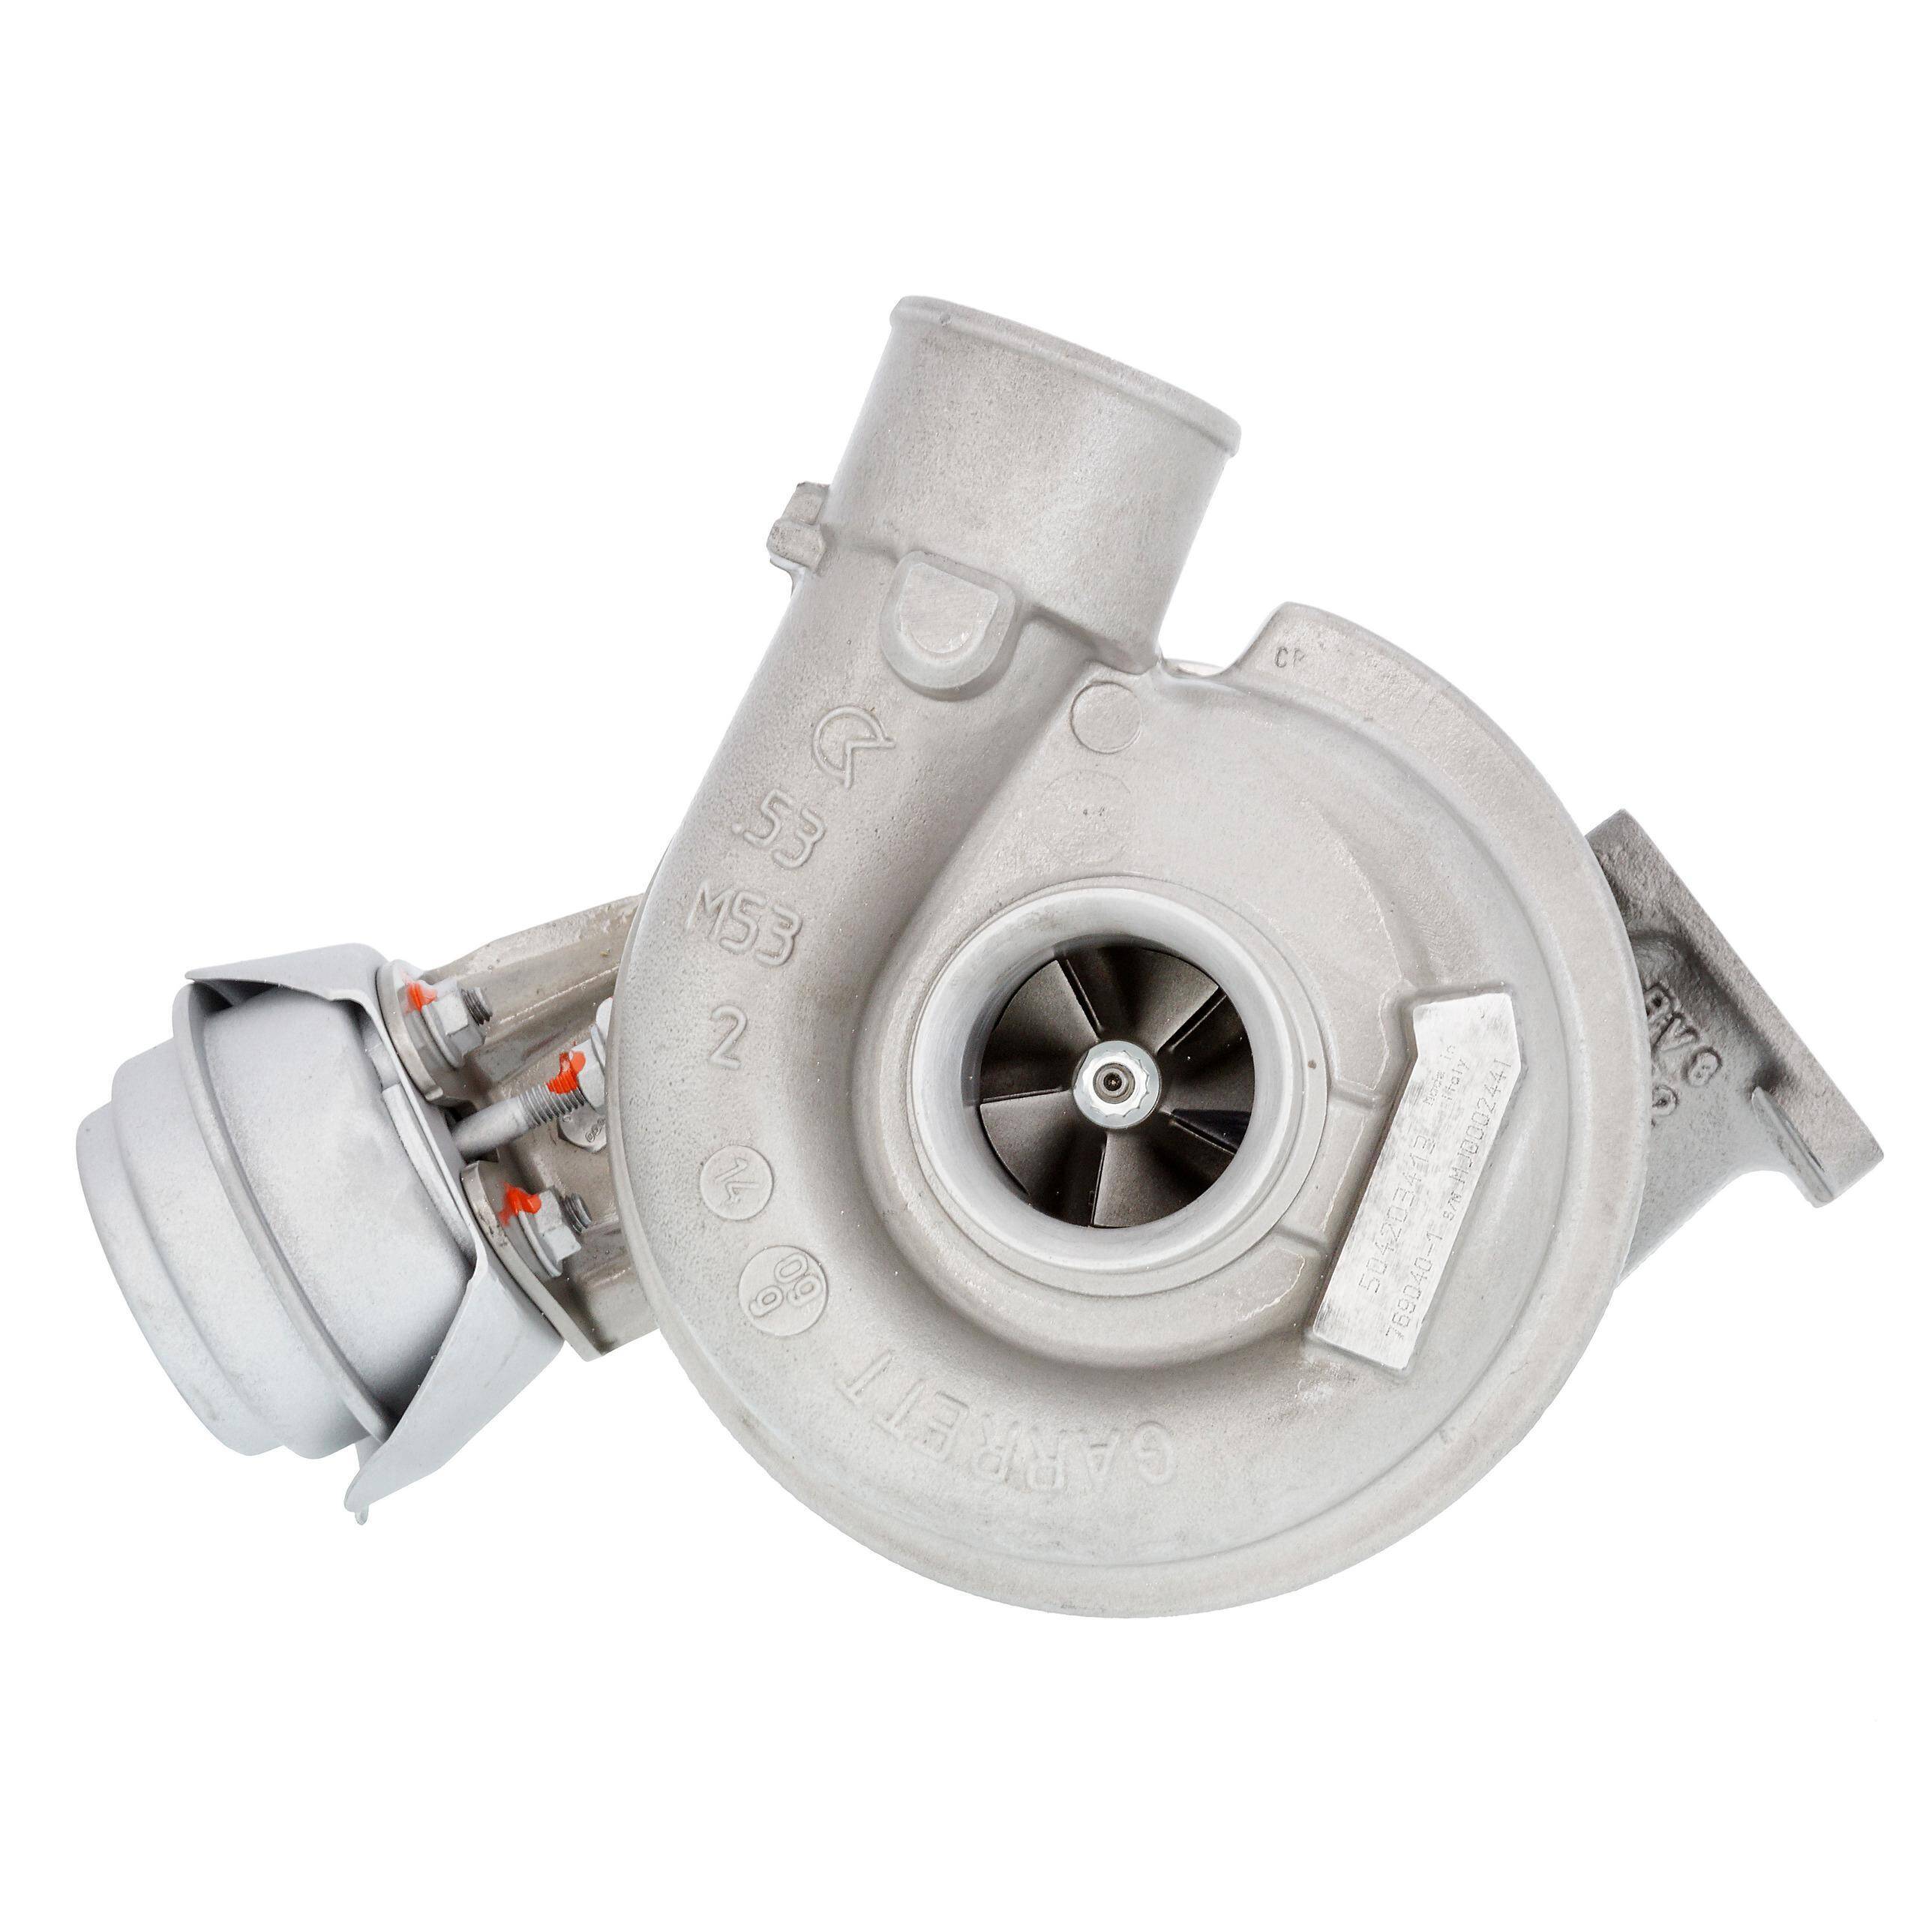 TURBOCHARGER TURBO REMANUFACTURED 769040-0001 769040-0001 769040-0001